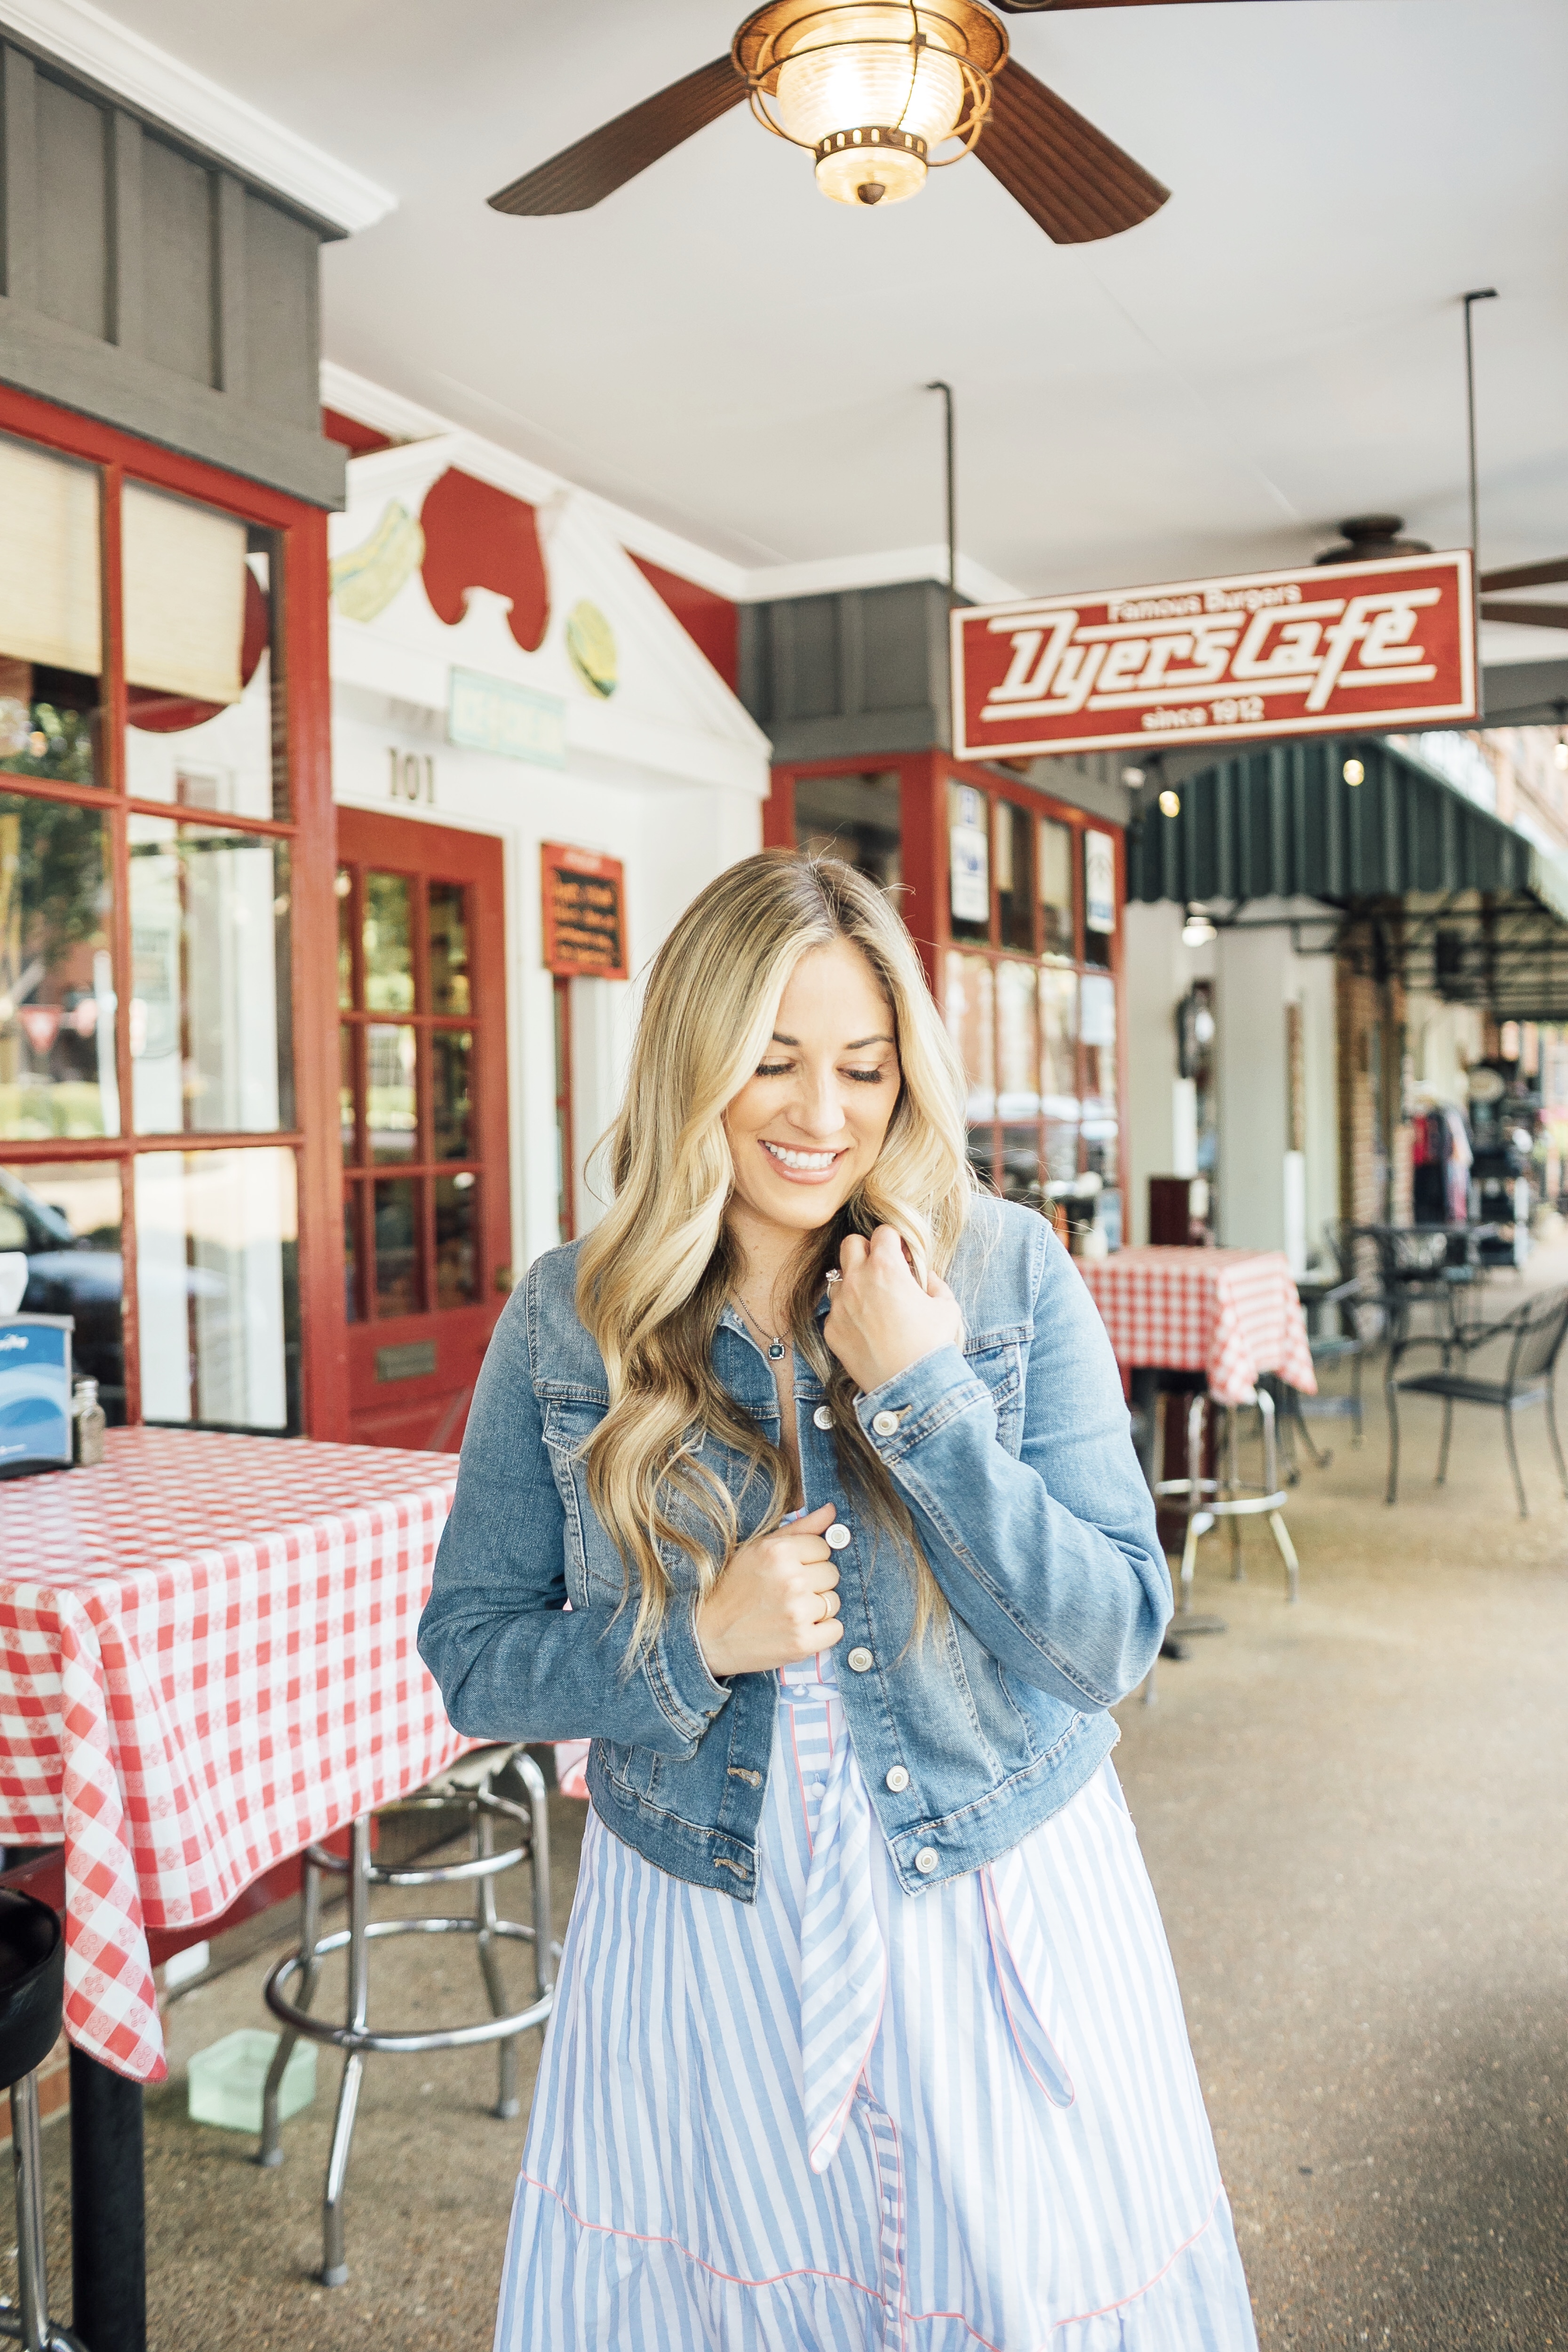 Eliza J Dress styled for summer by top US fashion blog, Walking in Memphis in High Heels: image of a woman wearing an Eliza J striped maxi dress, Sofia Jeans by Sofia Vergara denim jacket and Marc Fisher espadrille sandals.